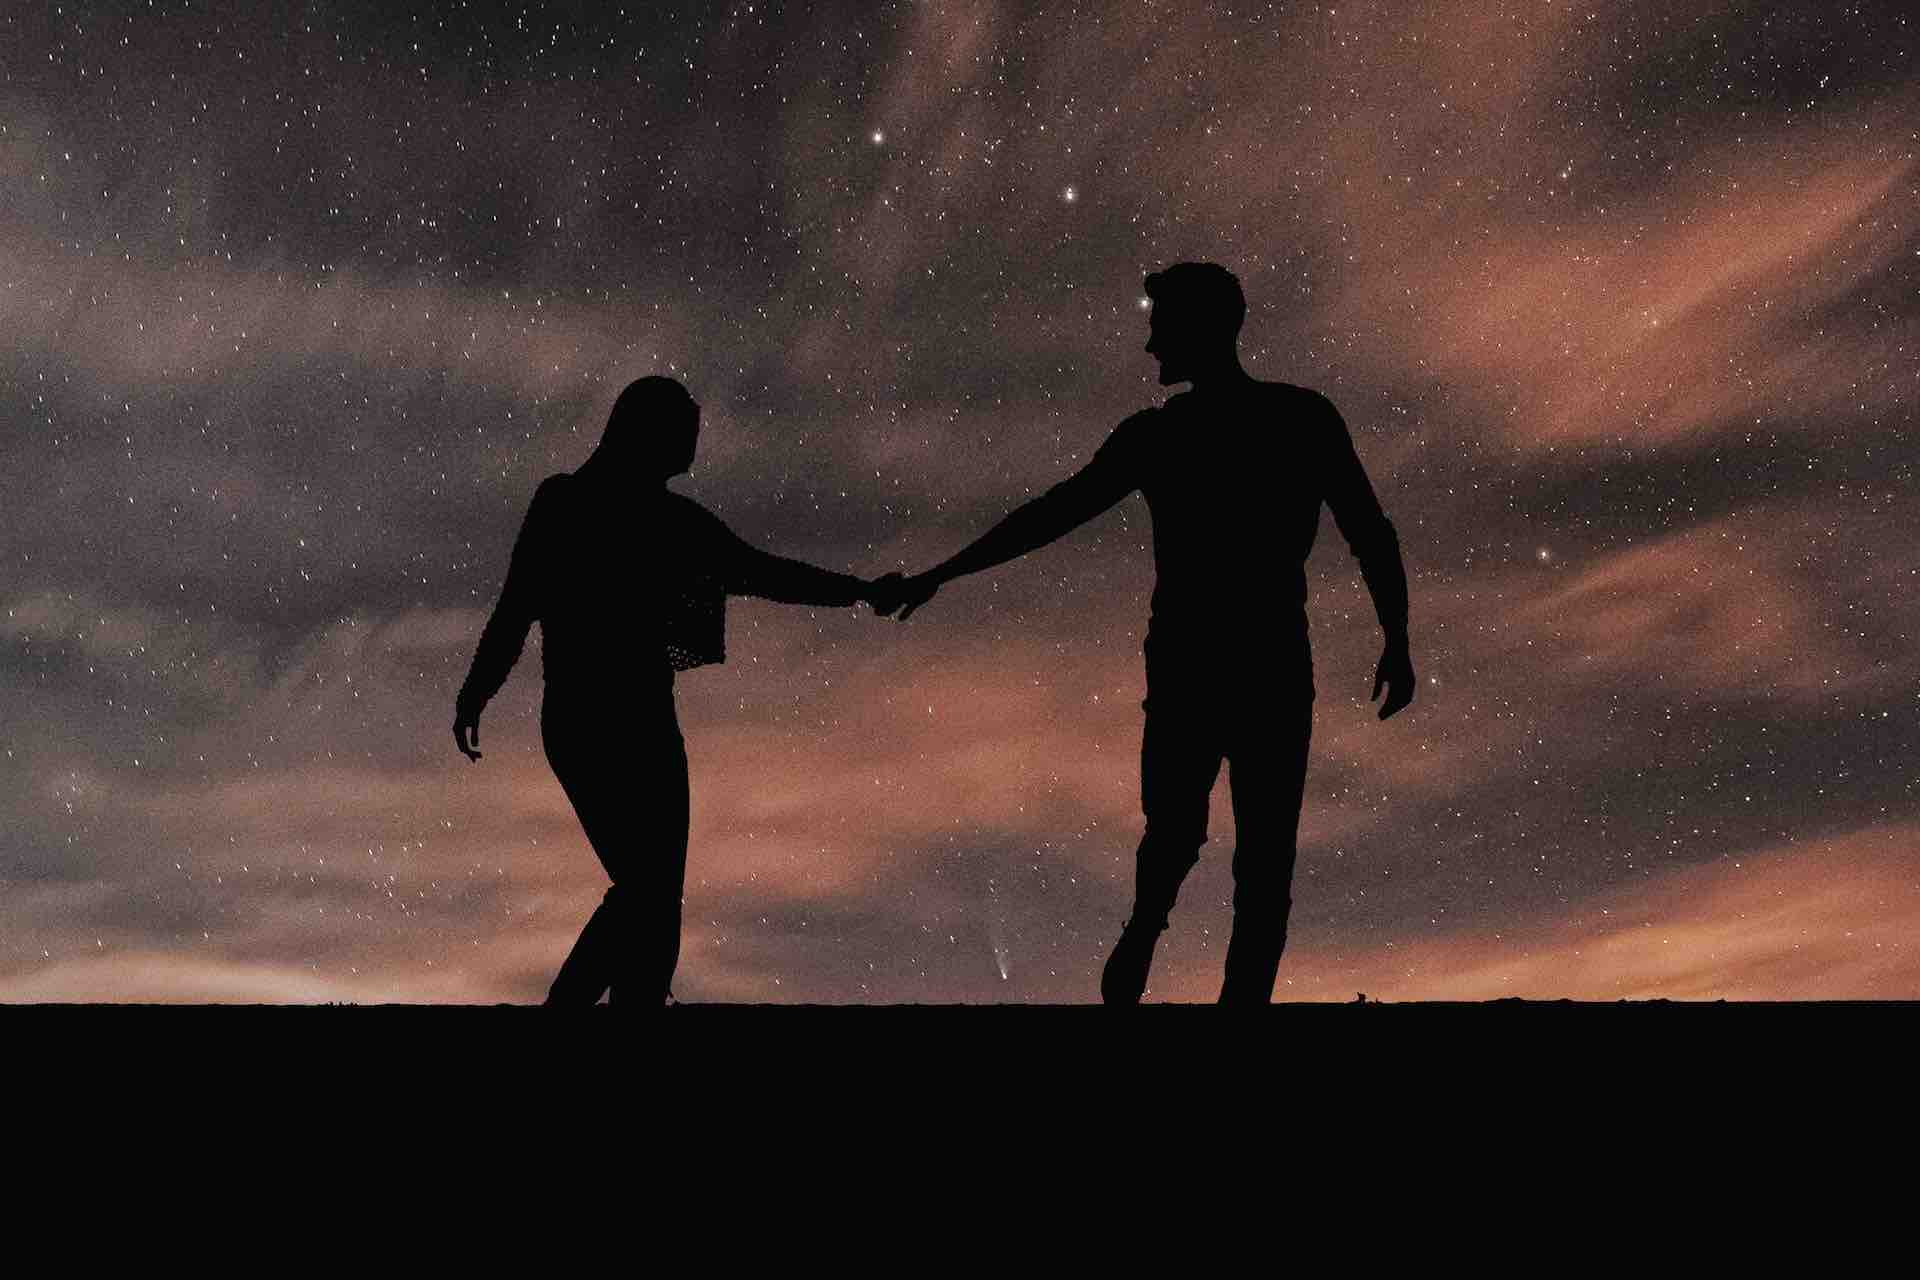 couple lovers in romantic silhouette sky background